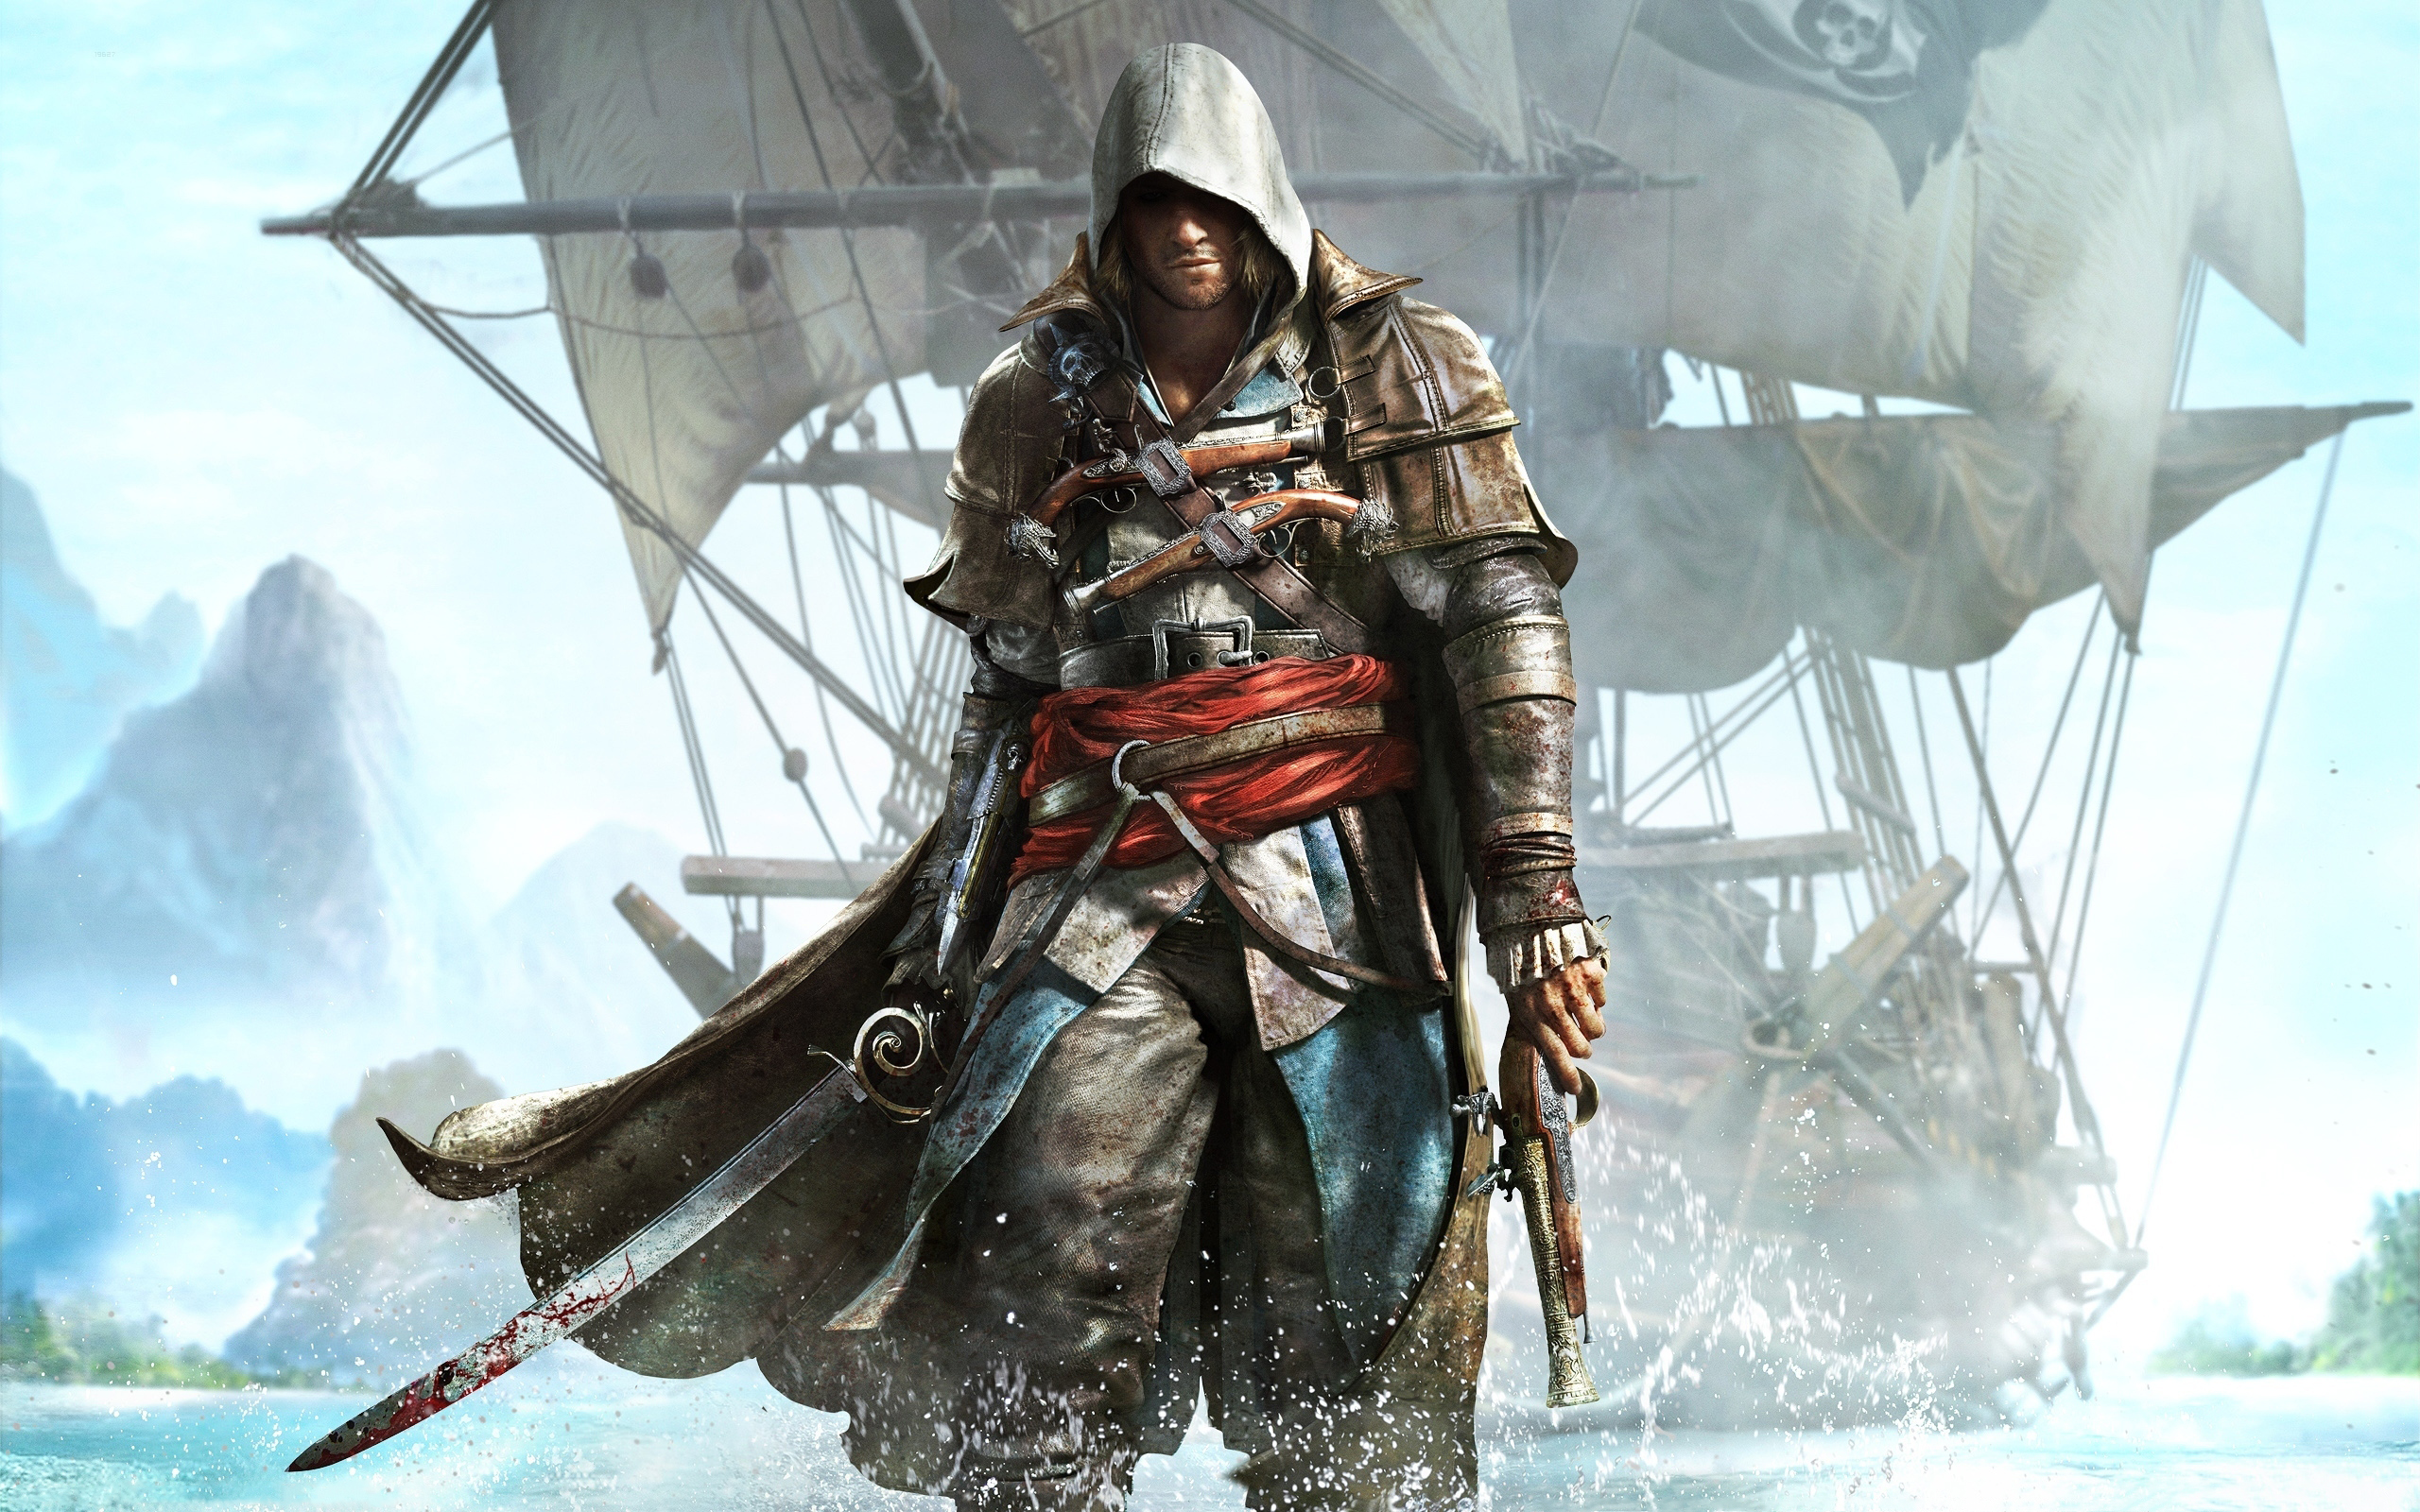 edward kenway, assassin's creed iv: black flag, assassin's creed, video game